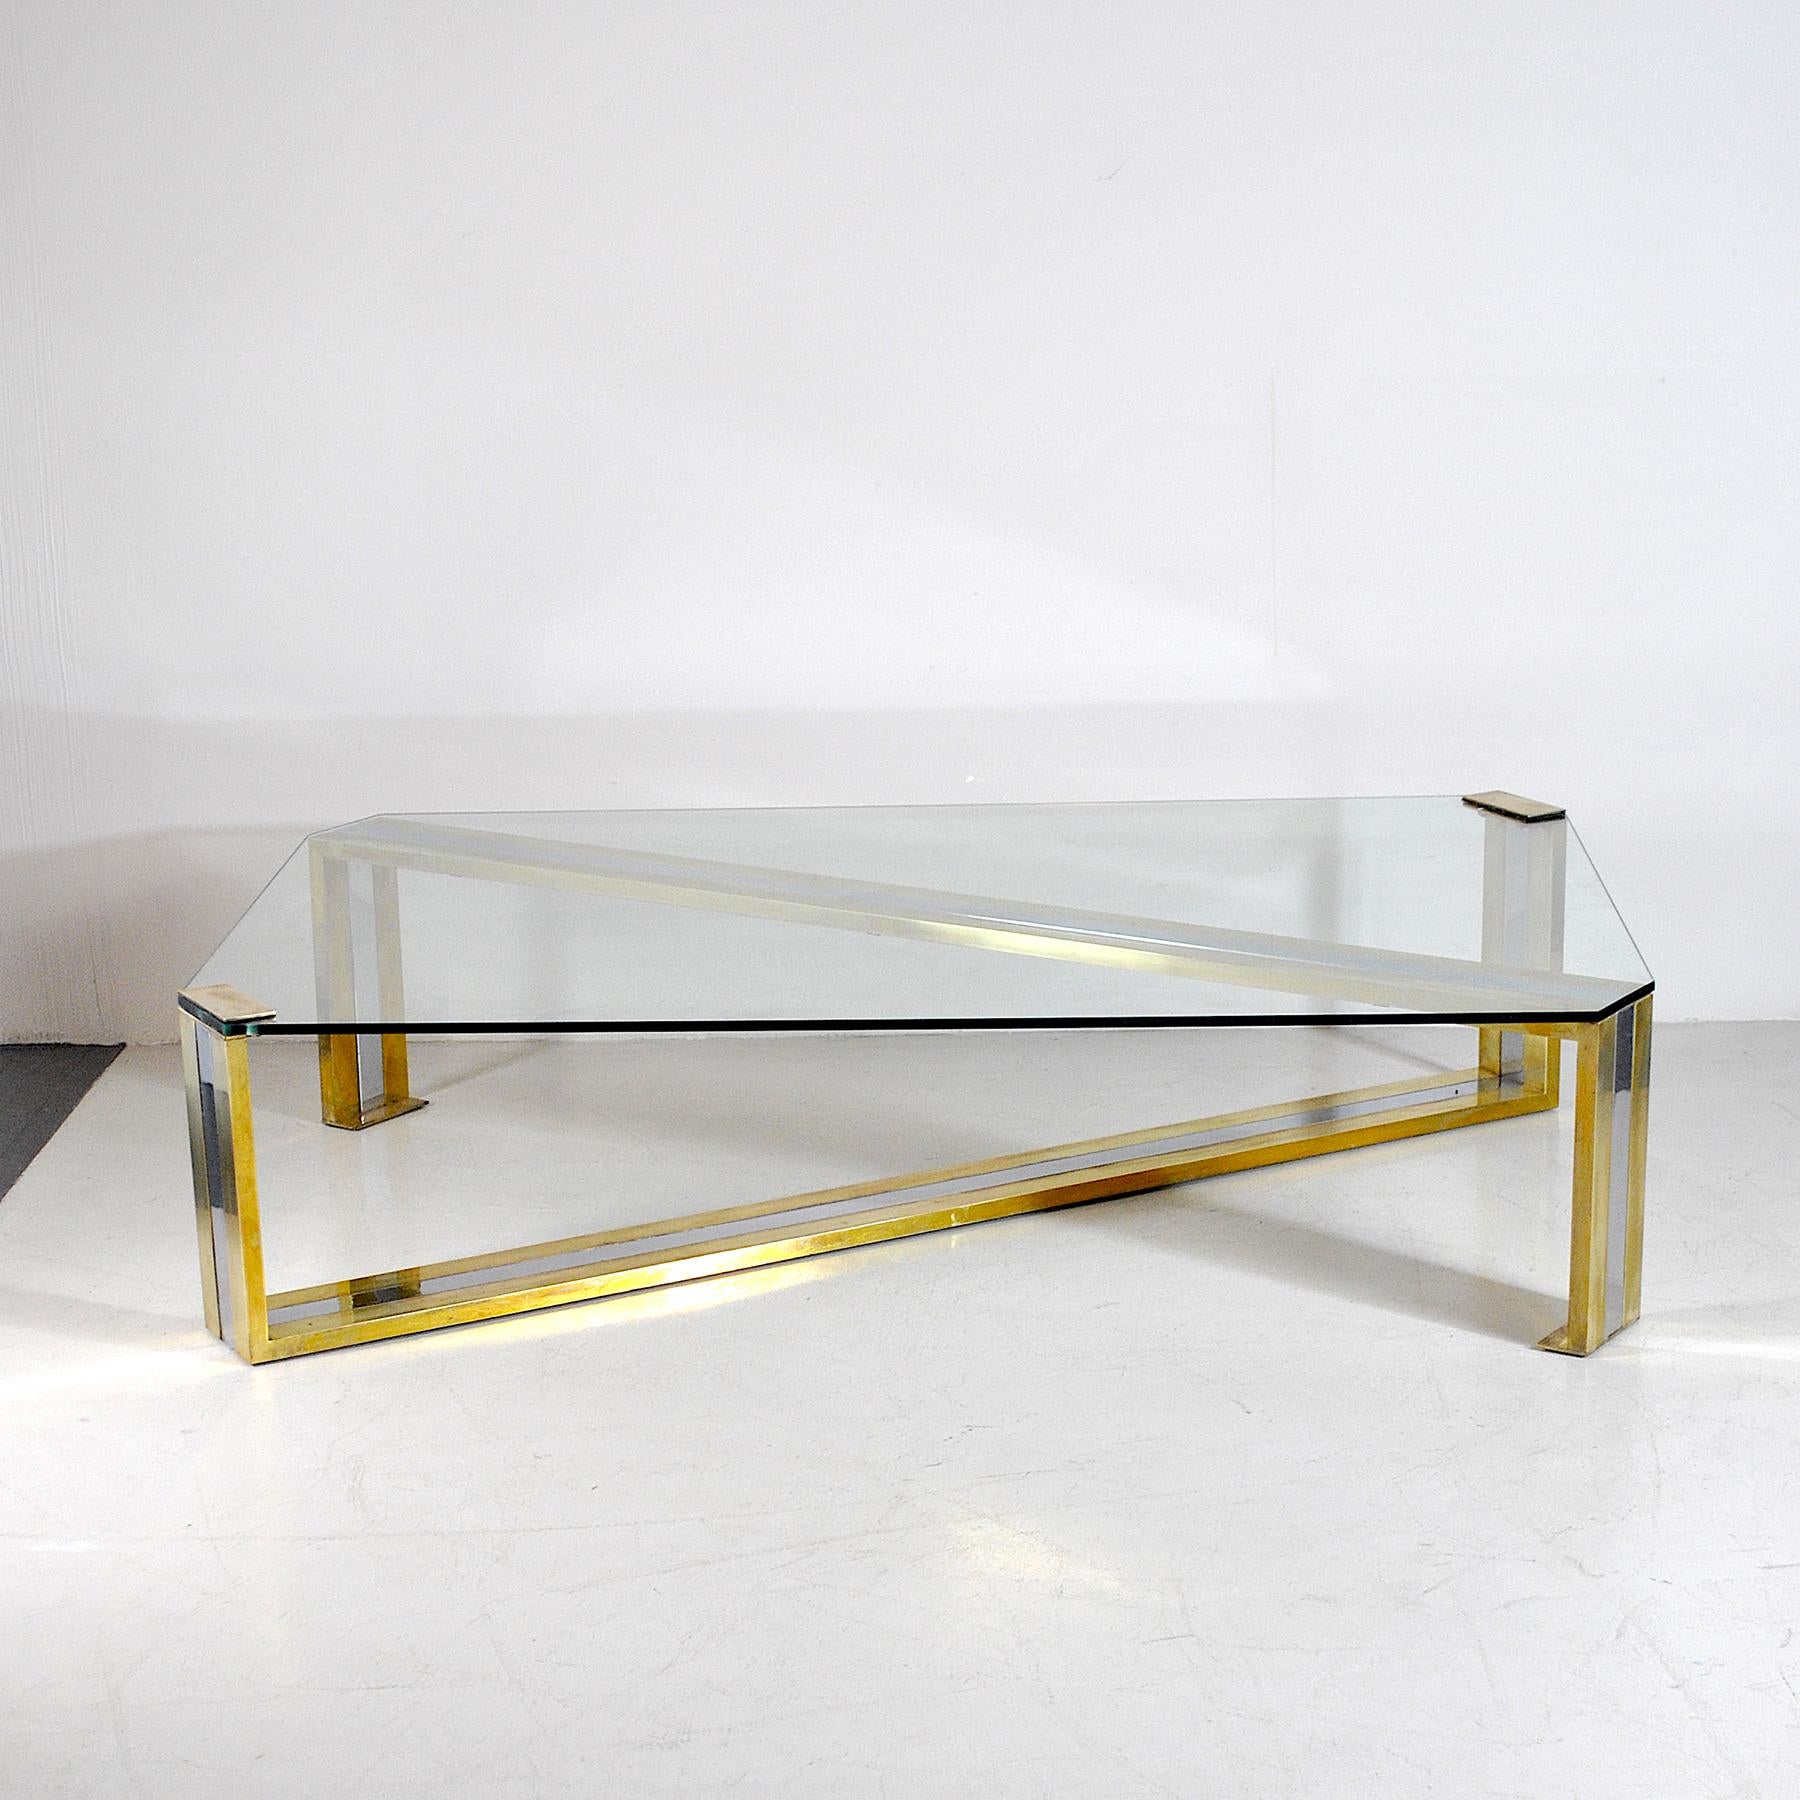 Rare coffee table model with crossover structure by Romeo Rega Italian production 1970s